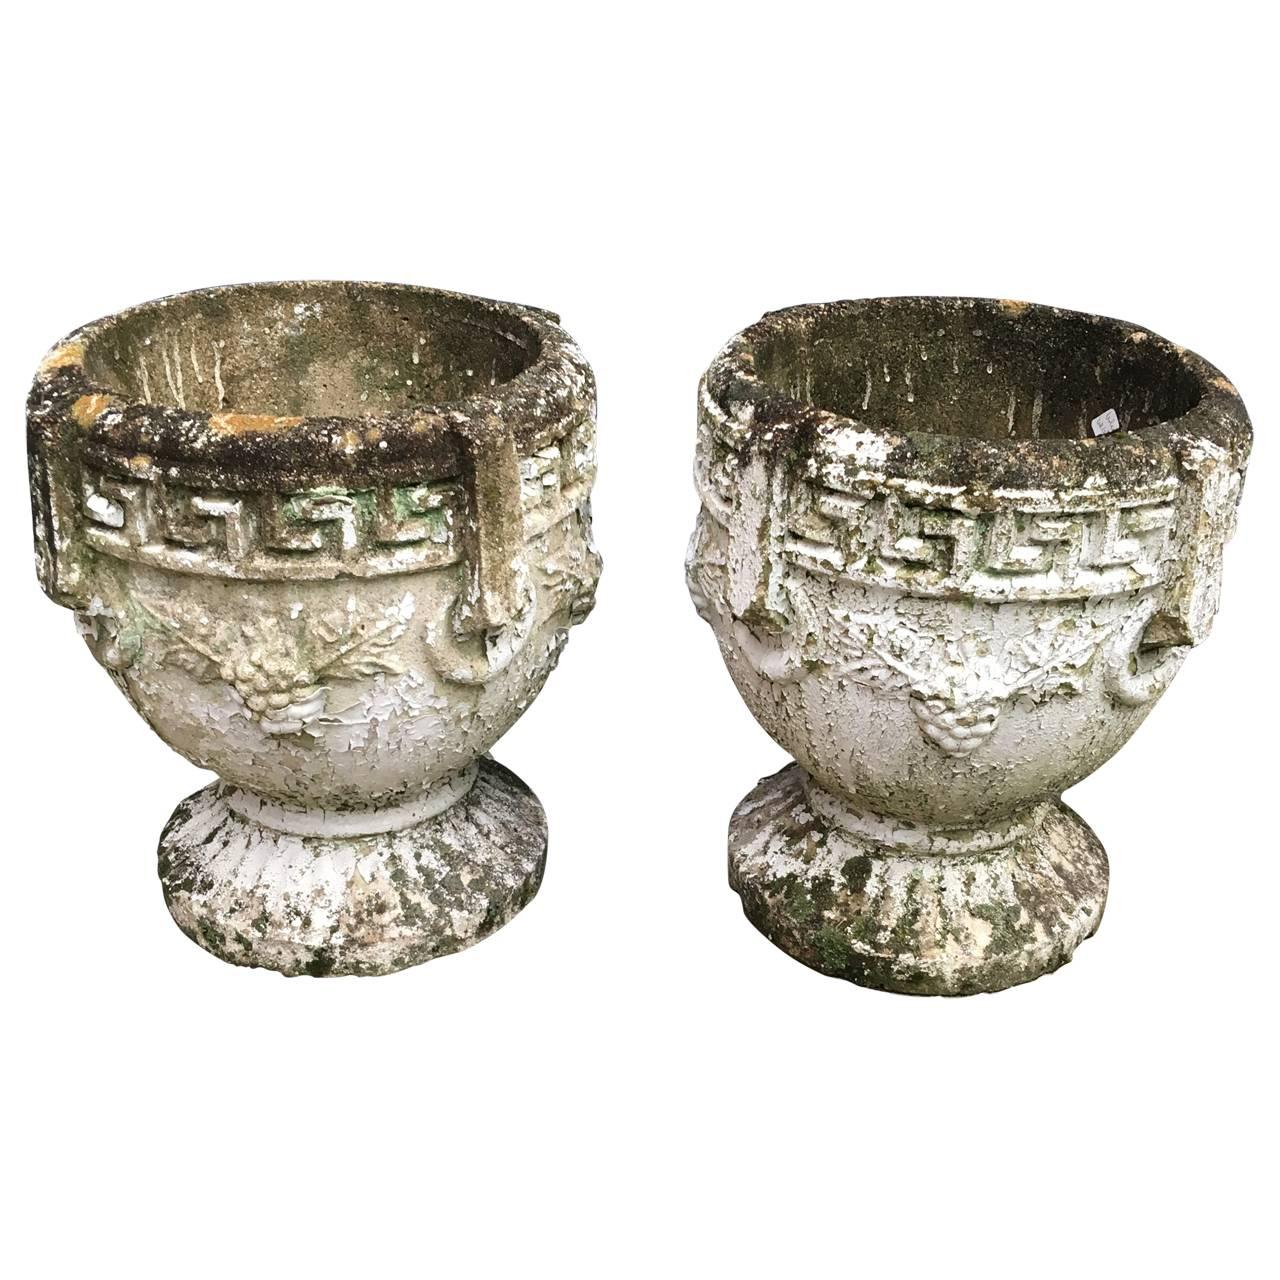 Charming pair of planters with great patina.